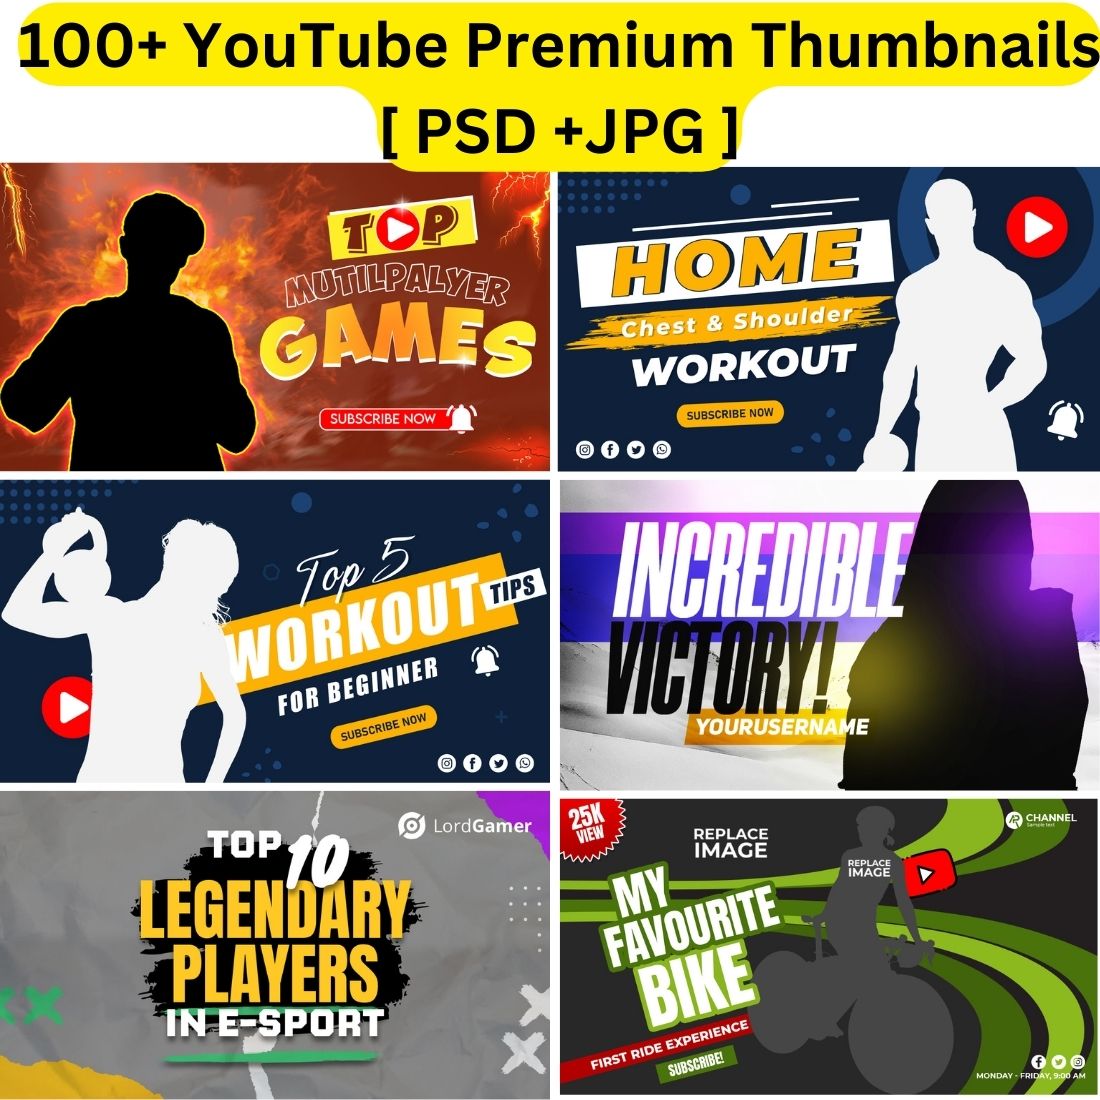 100+ YouTube Premium Custom Thumbnails Bundle for Gym , Gaming, Business ,Personal videos [ PSD +JPG ] cover image.